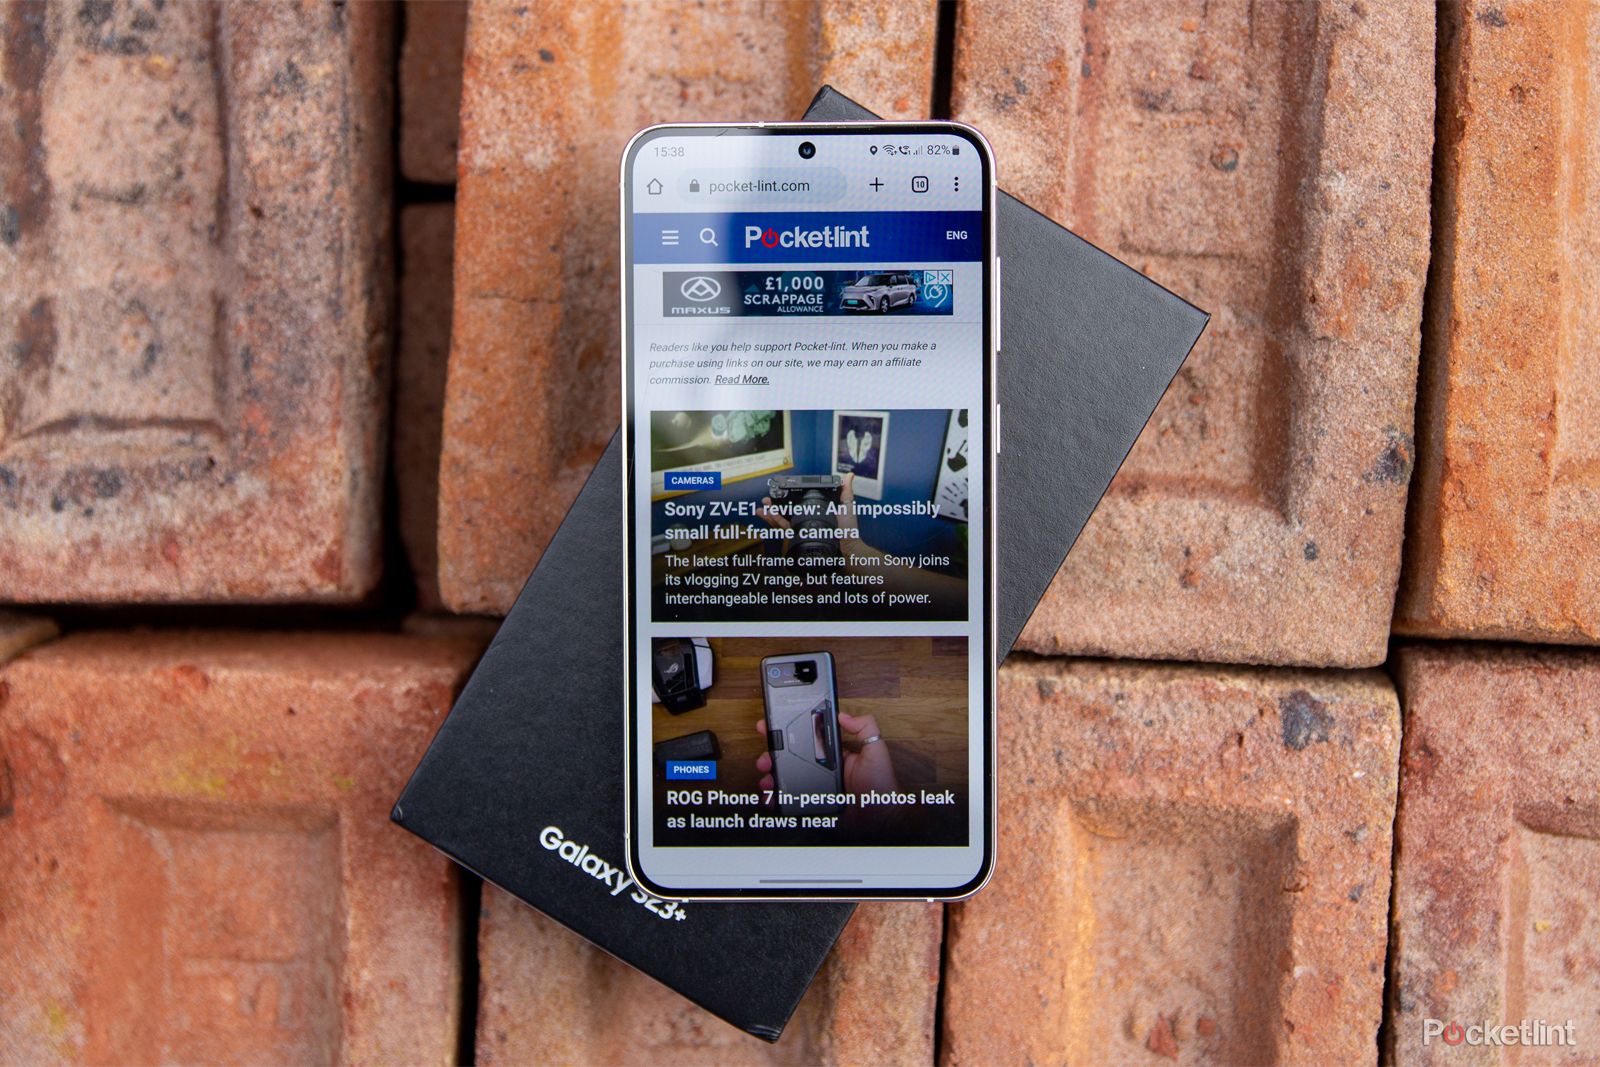 Samsung Galaxy S23 Plus Review: Right in the sweet spot - BusinessToday